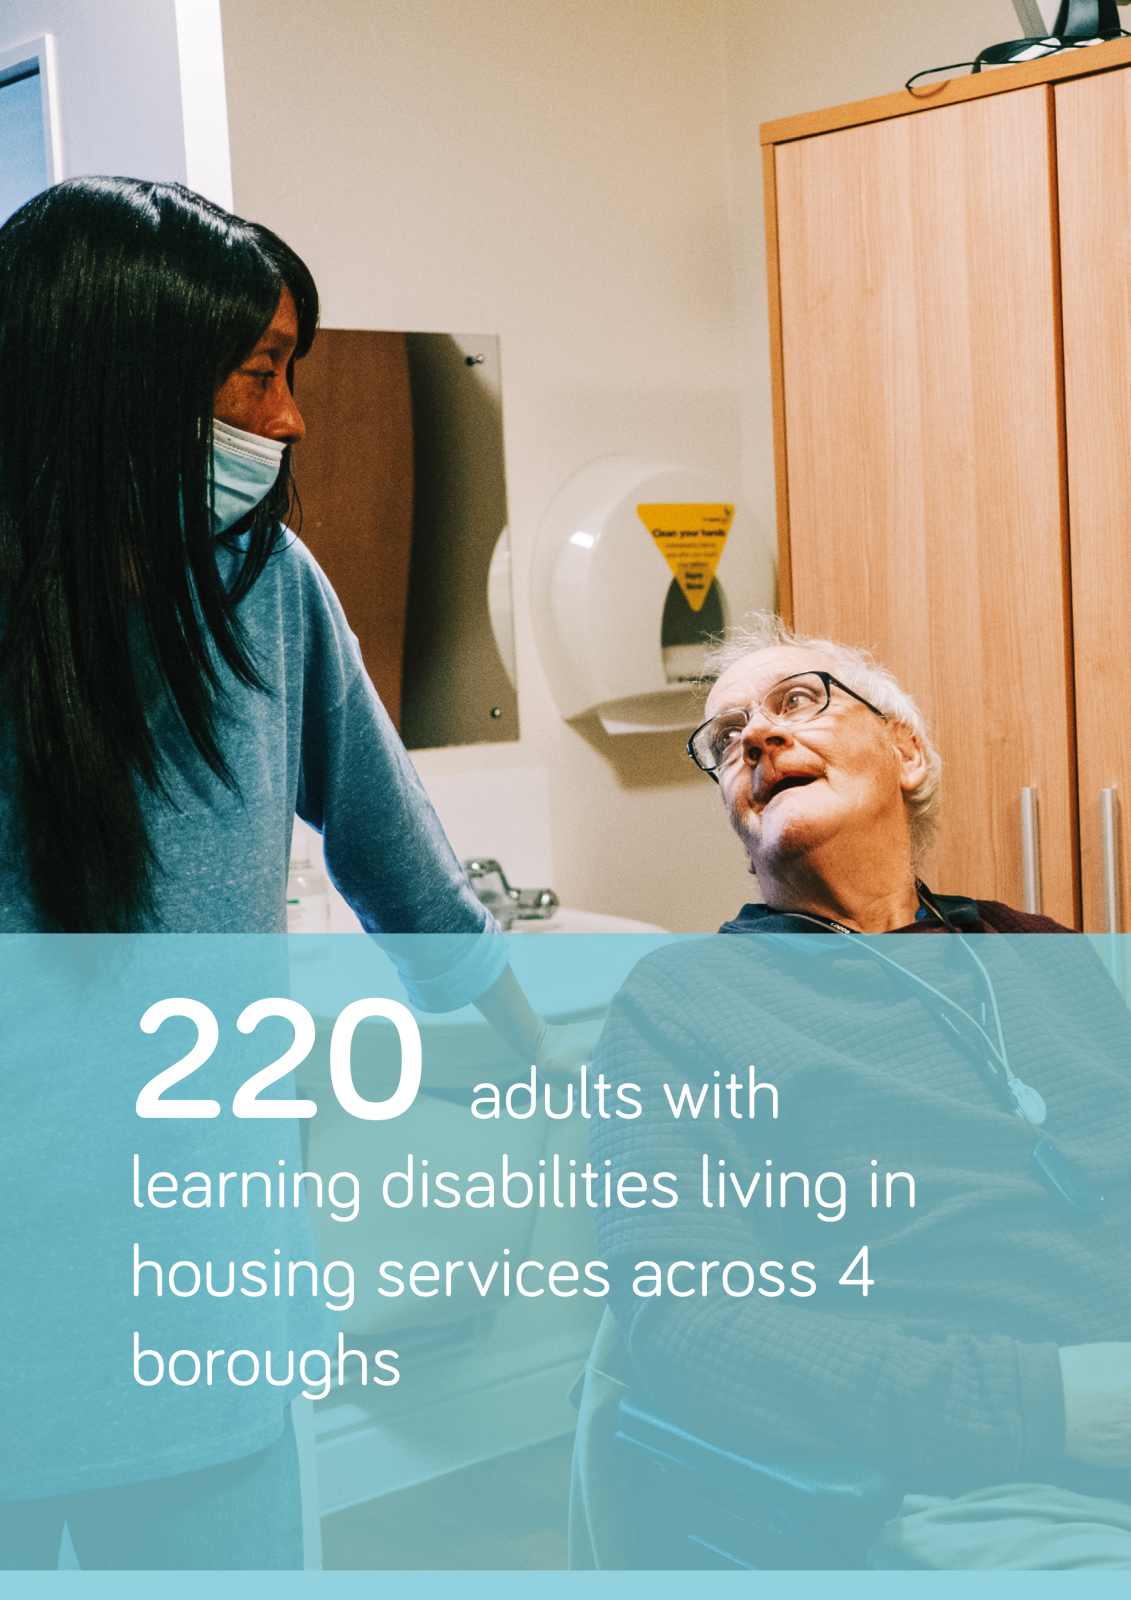 220 people with learning disabilites supported in housing services across 4 boroughs